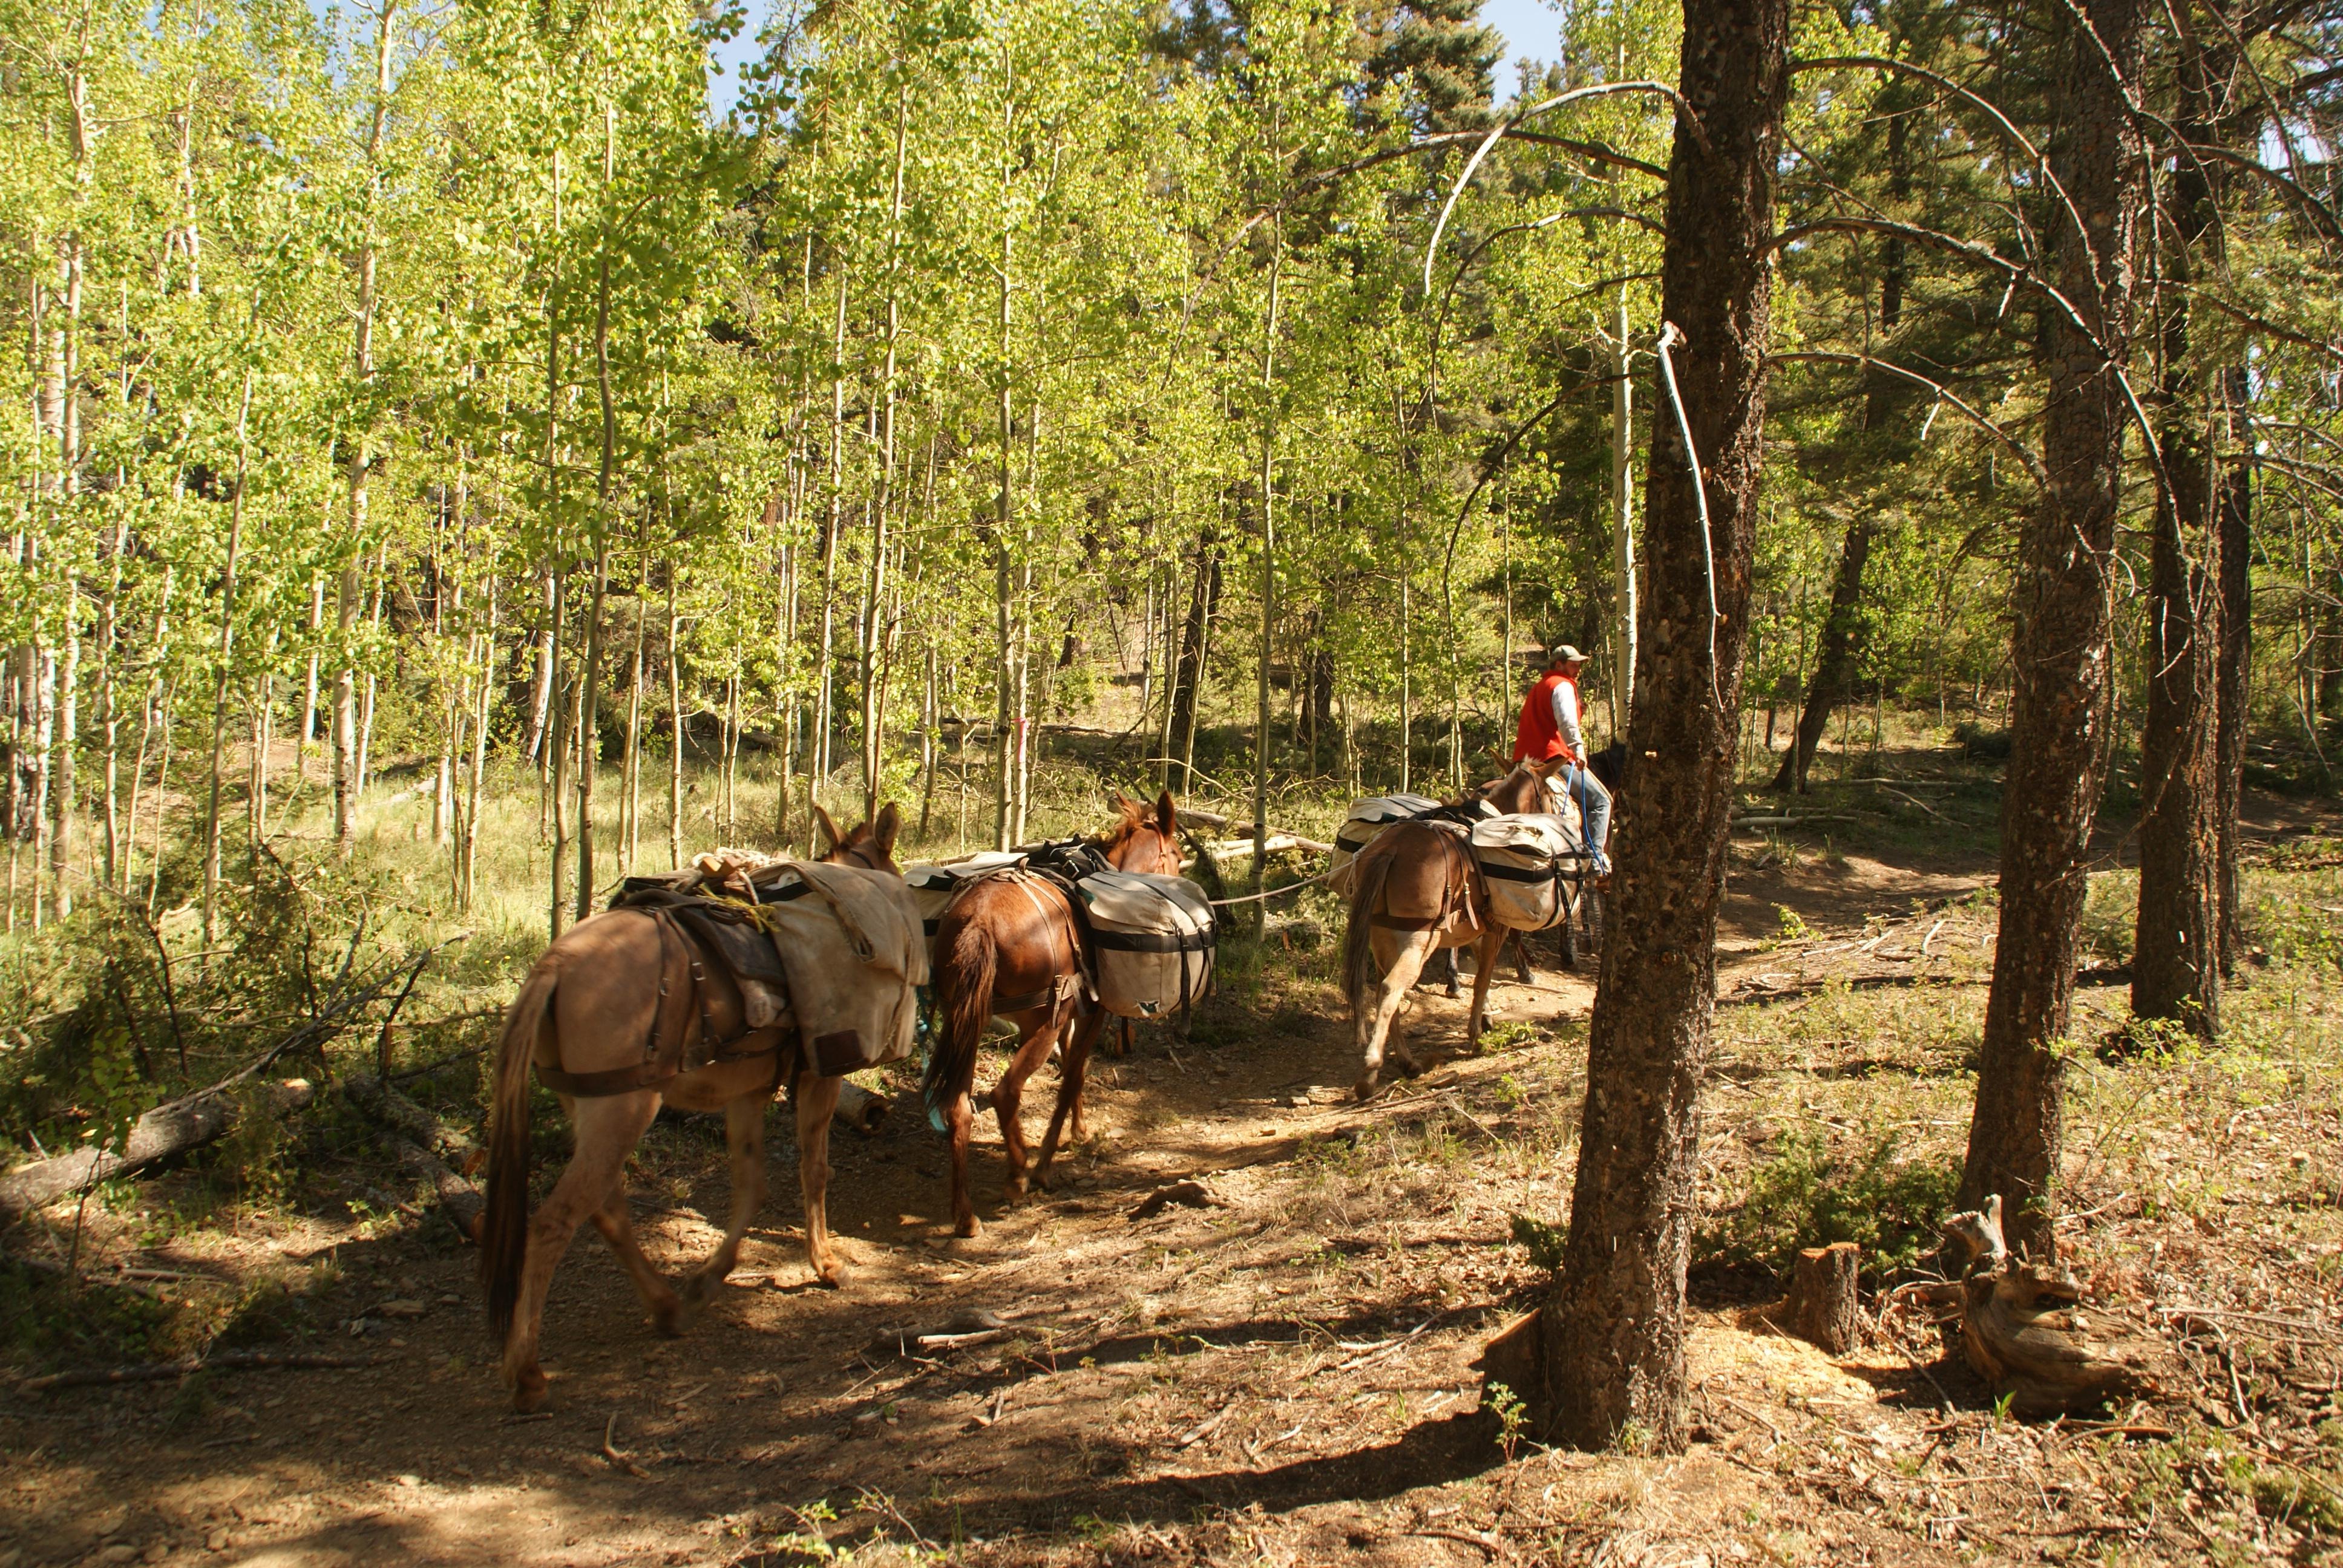 Horses and mules carrying gear walk down a dirt trail through the forest